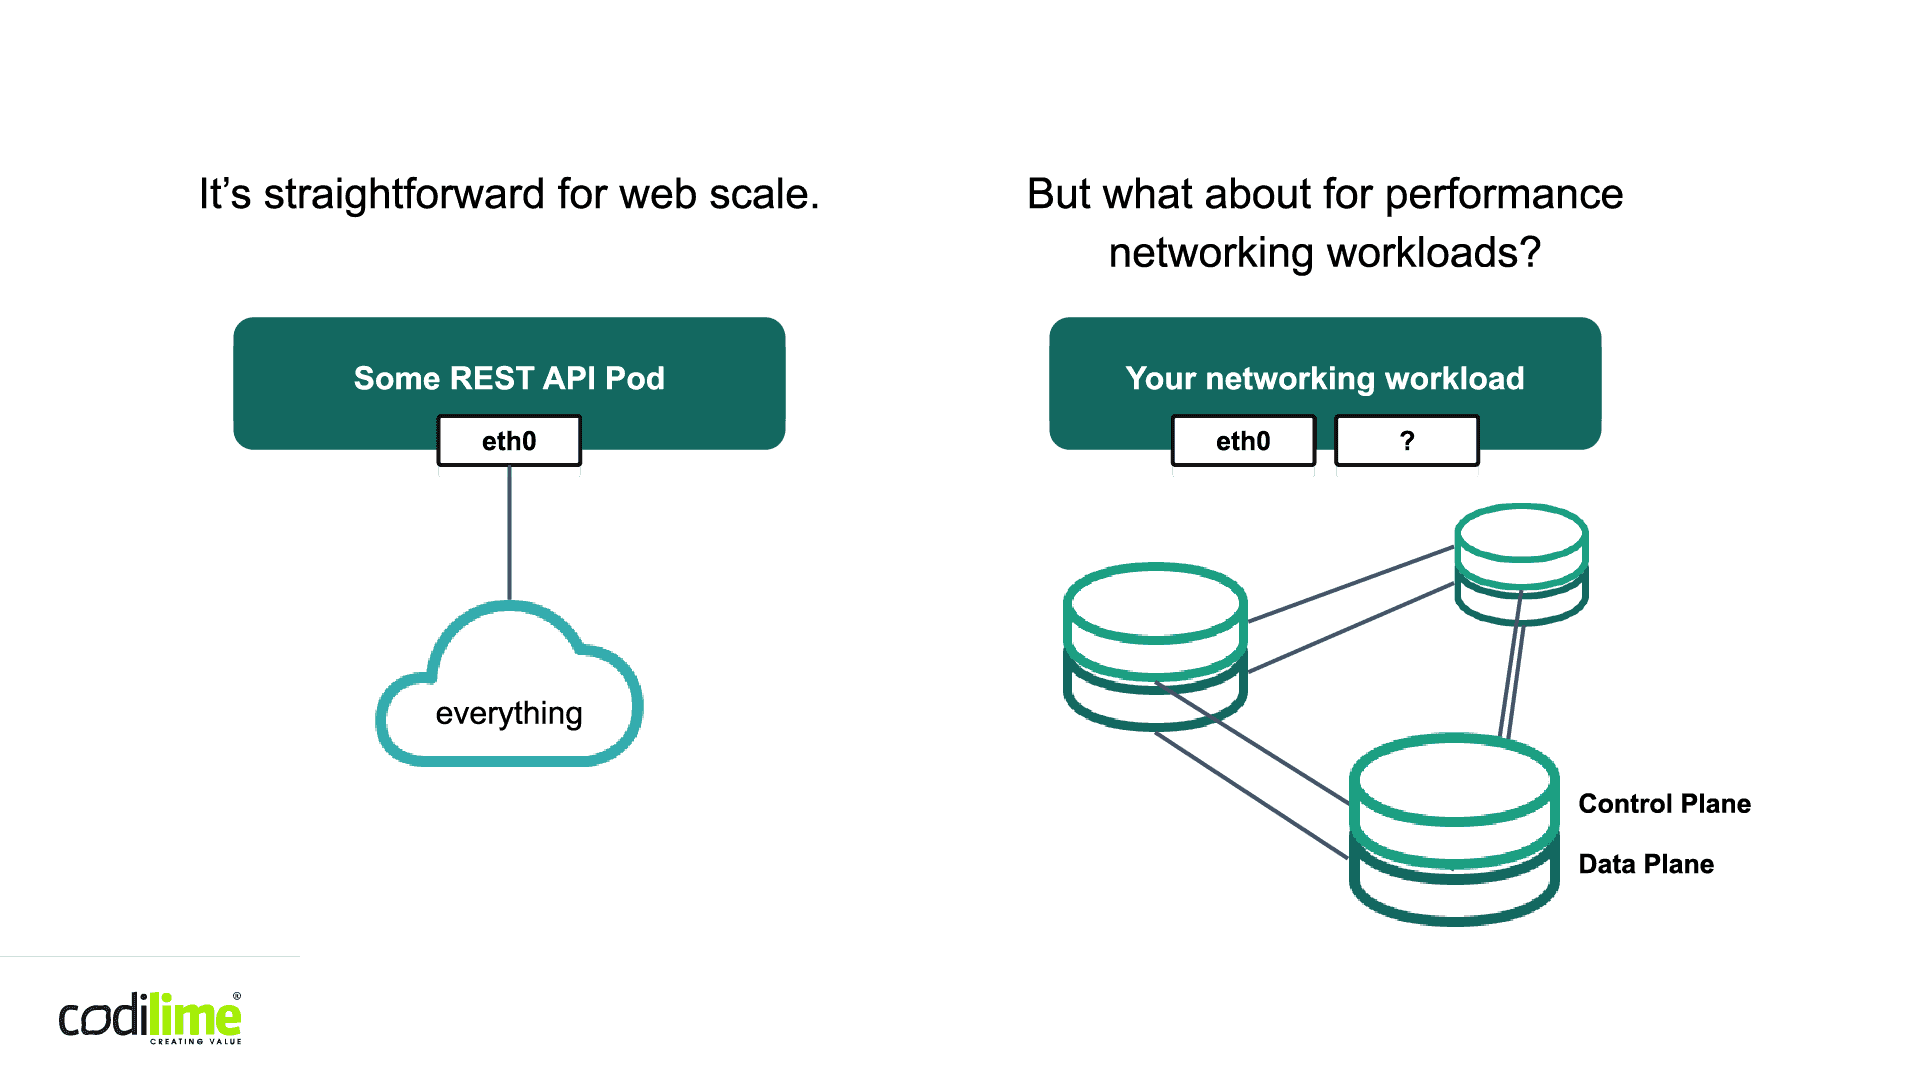 Networking for a simple app and for performance networking workloads